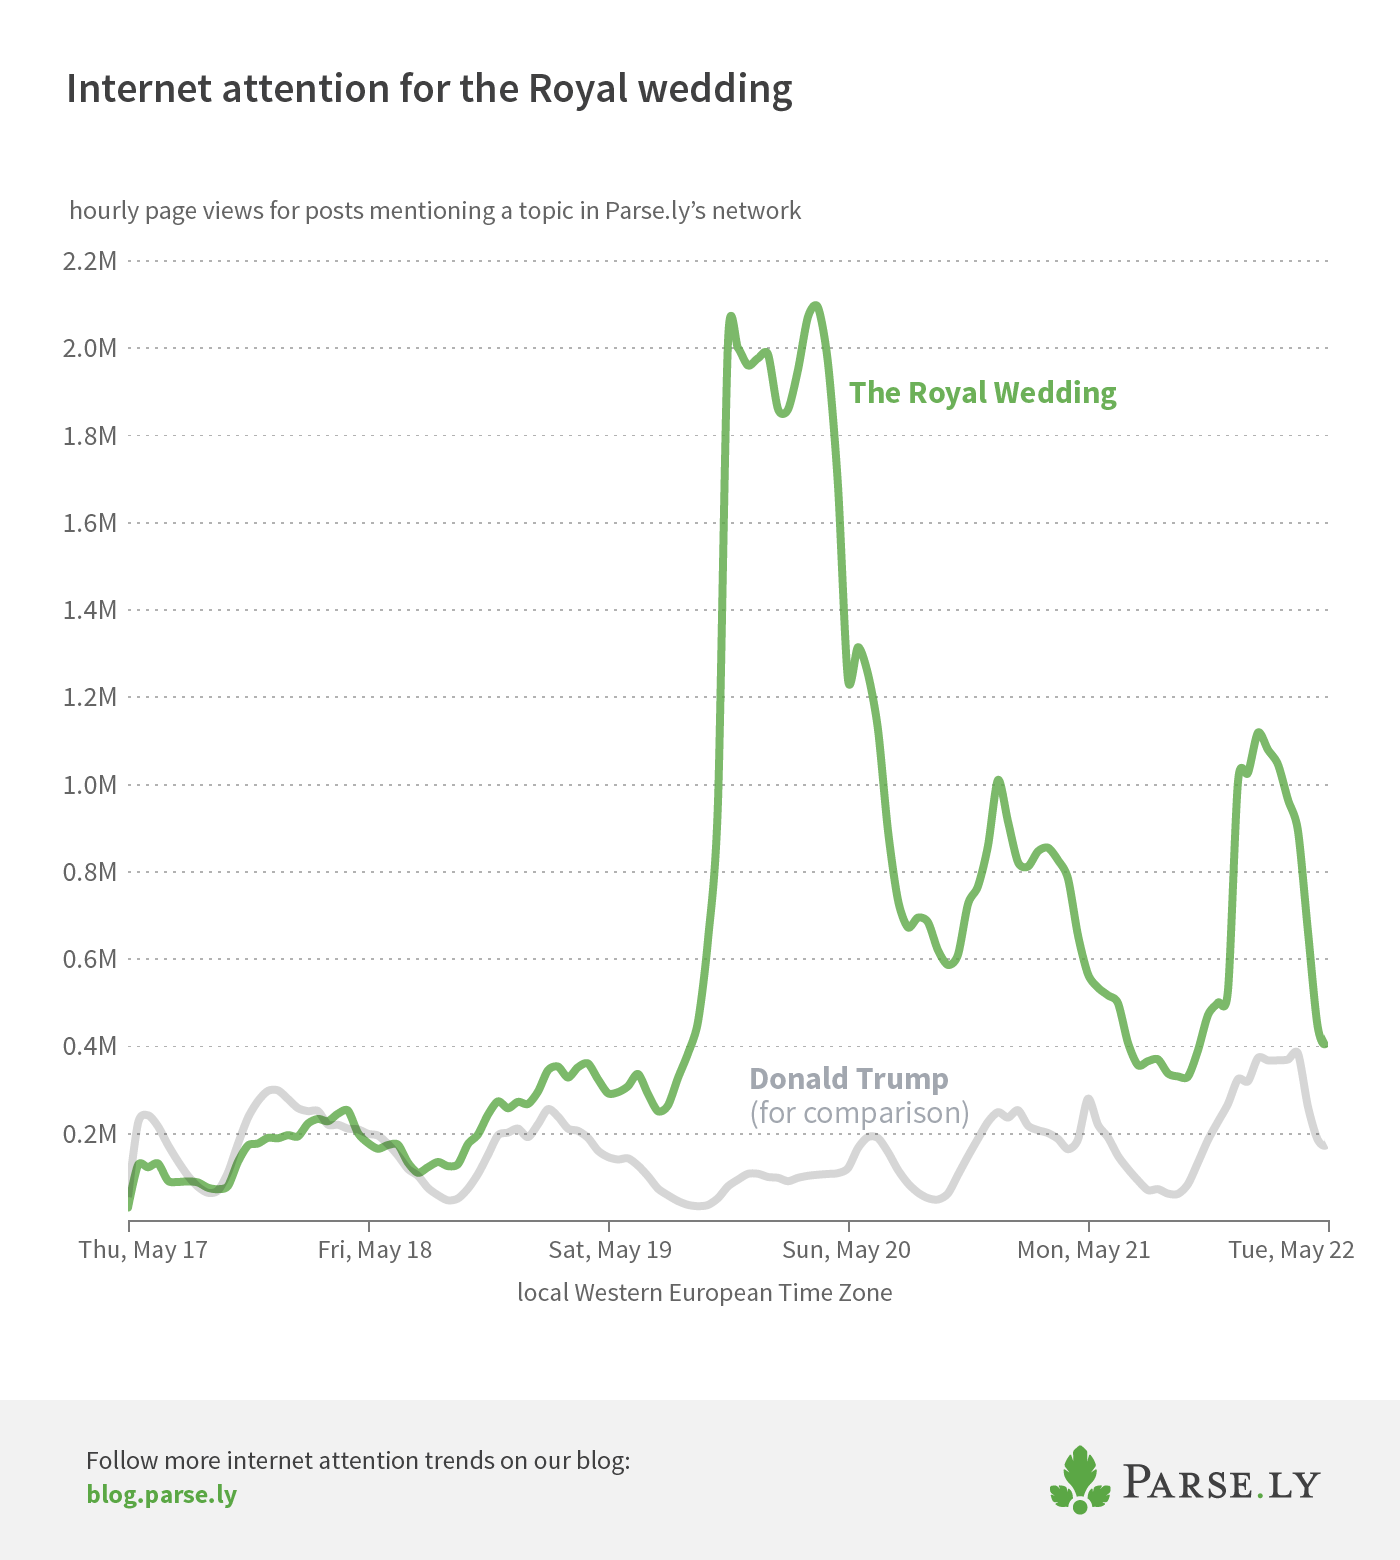 attention for the royal wedding across the Parse.ly network